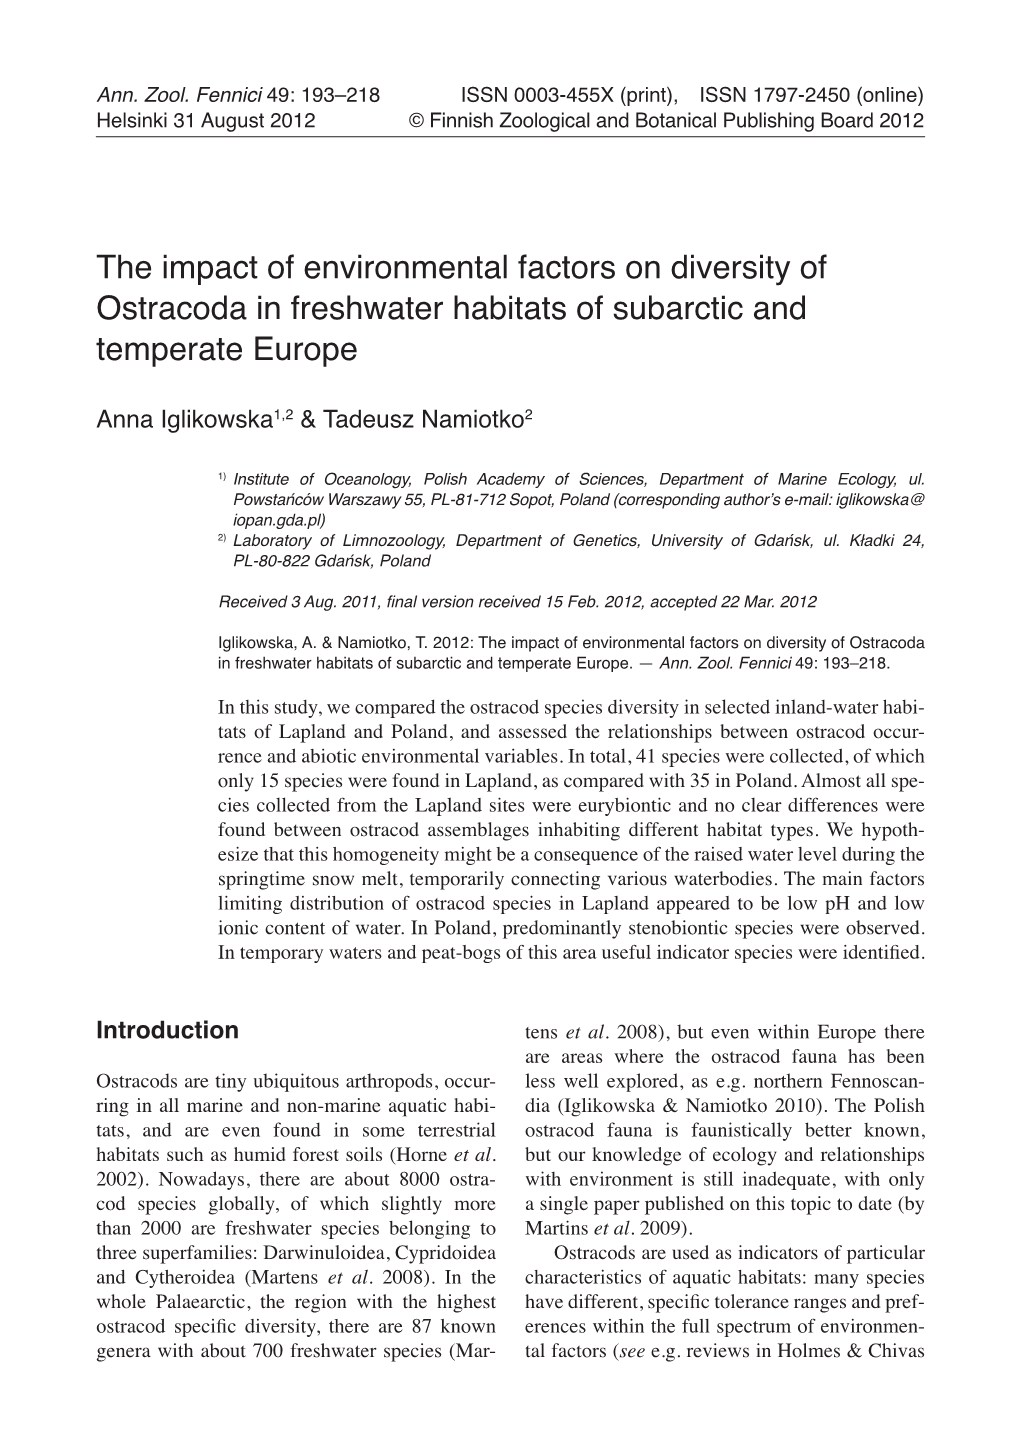 The Impact of Environmental Factors on Diversity of Ostracoda in Freshwater Habitats of Subarctic and Temperate Europe